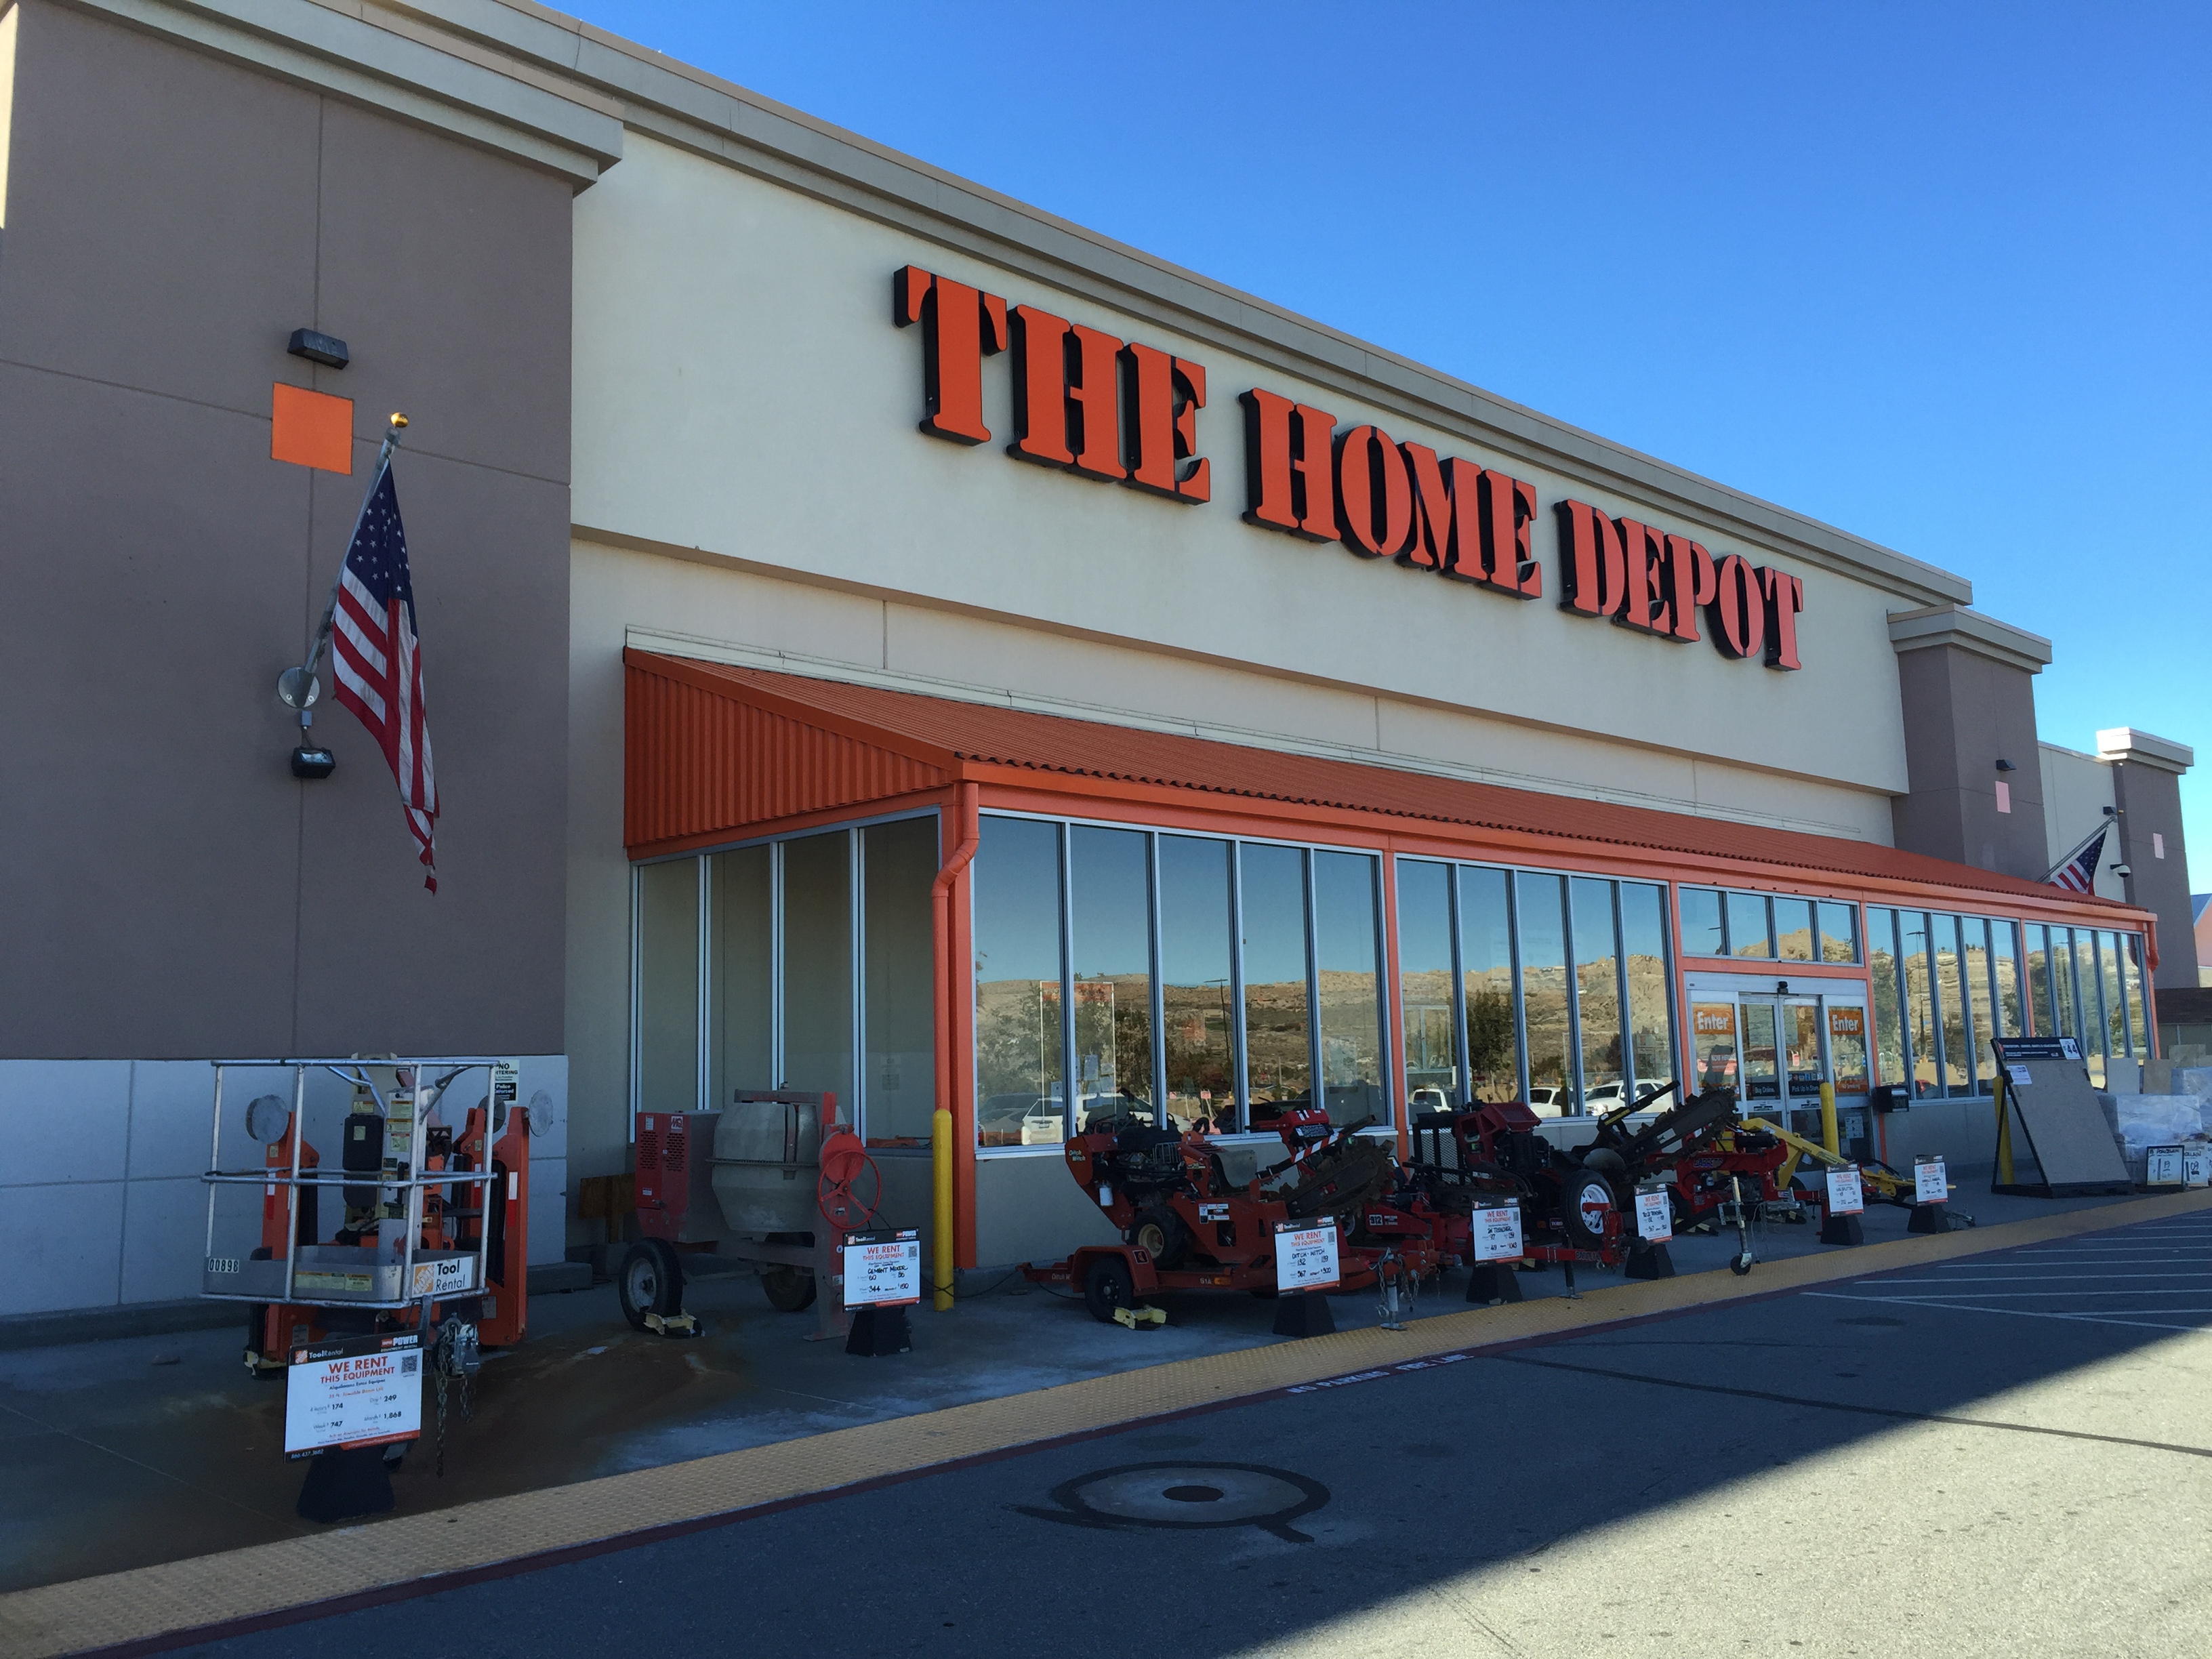 the-home-depot-near-me-28-images-the-home-depot-near-home-design-123